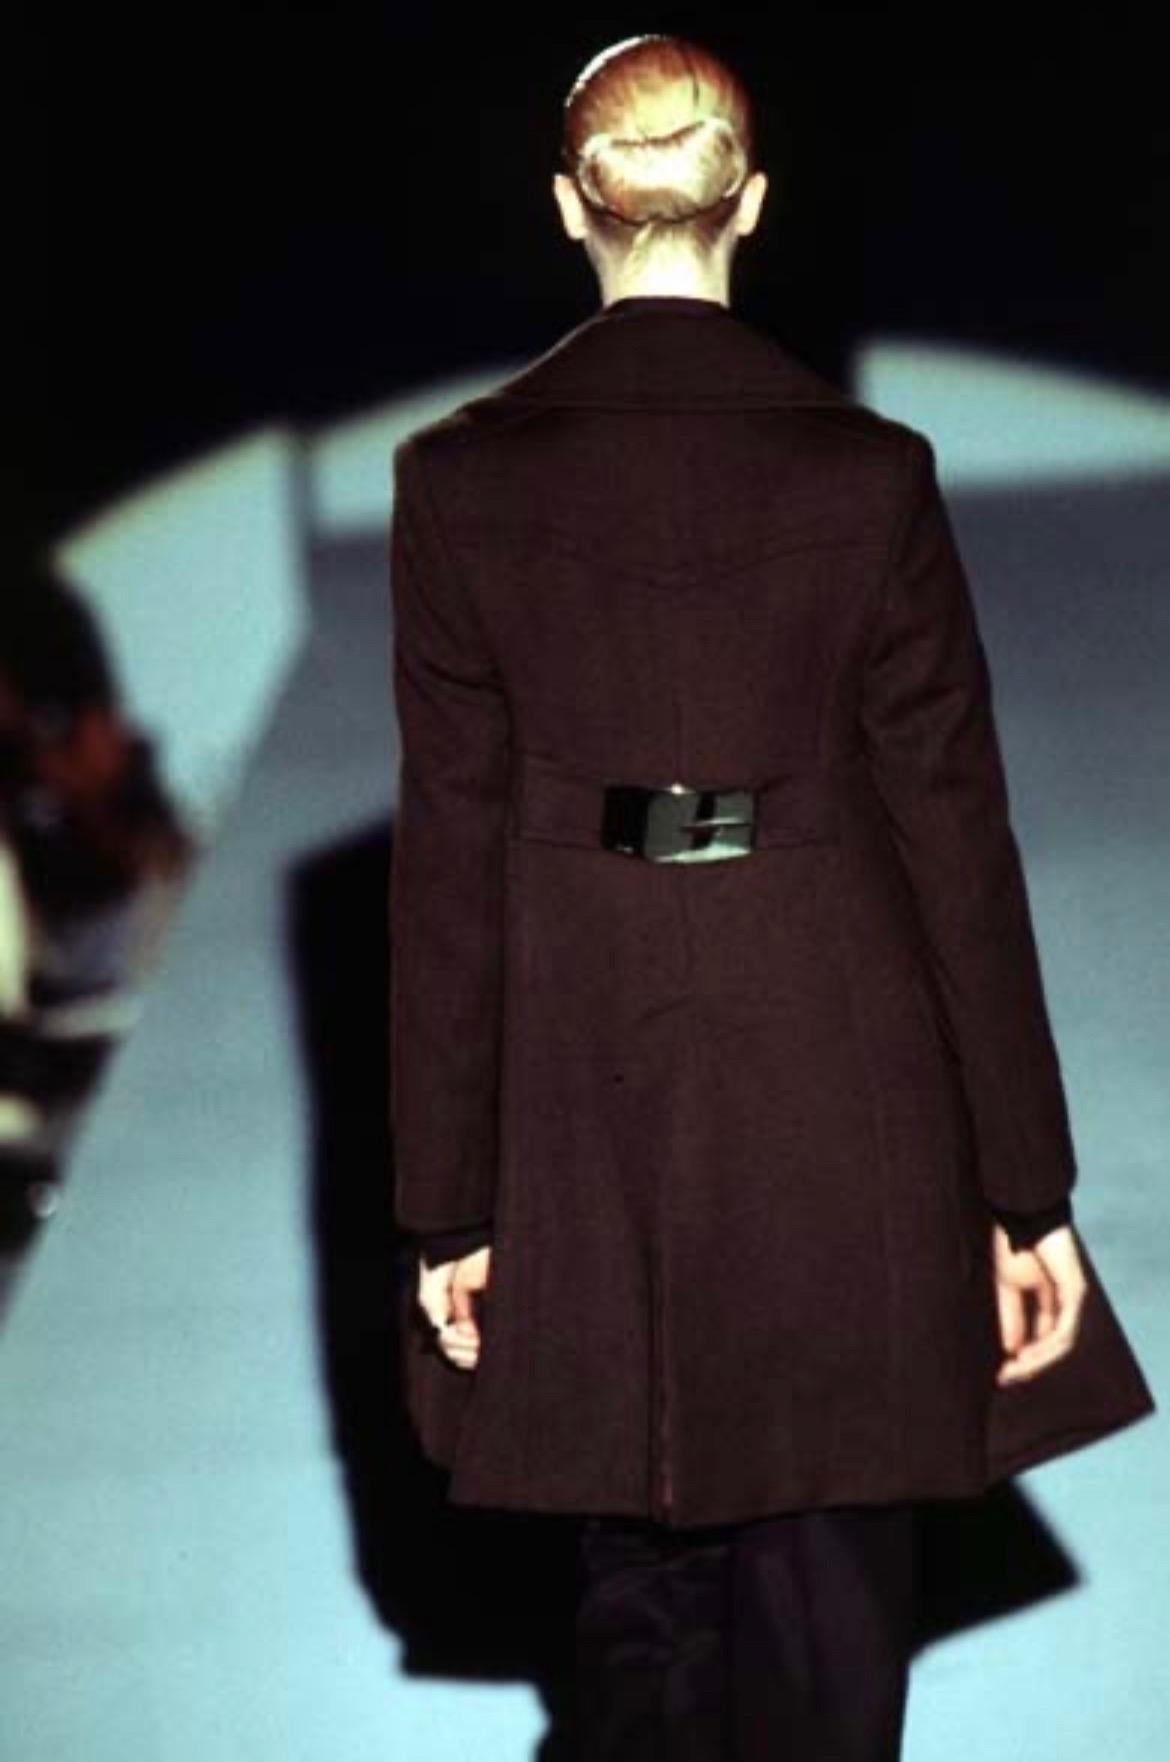 Presenting Tom Ford's reinvented modern take on Gucci's 'G' prominently placed on a classic brown wool coat. This Gucci by Tom Ford creation is from the F/W 1996 collection, the same oversized buckle was heavily featured on the runway and remains an